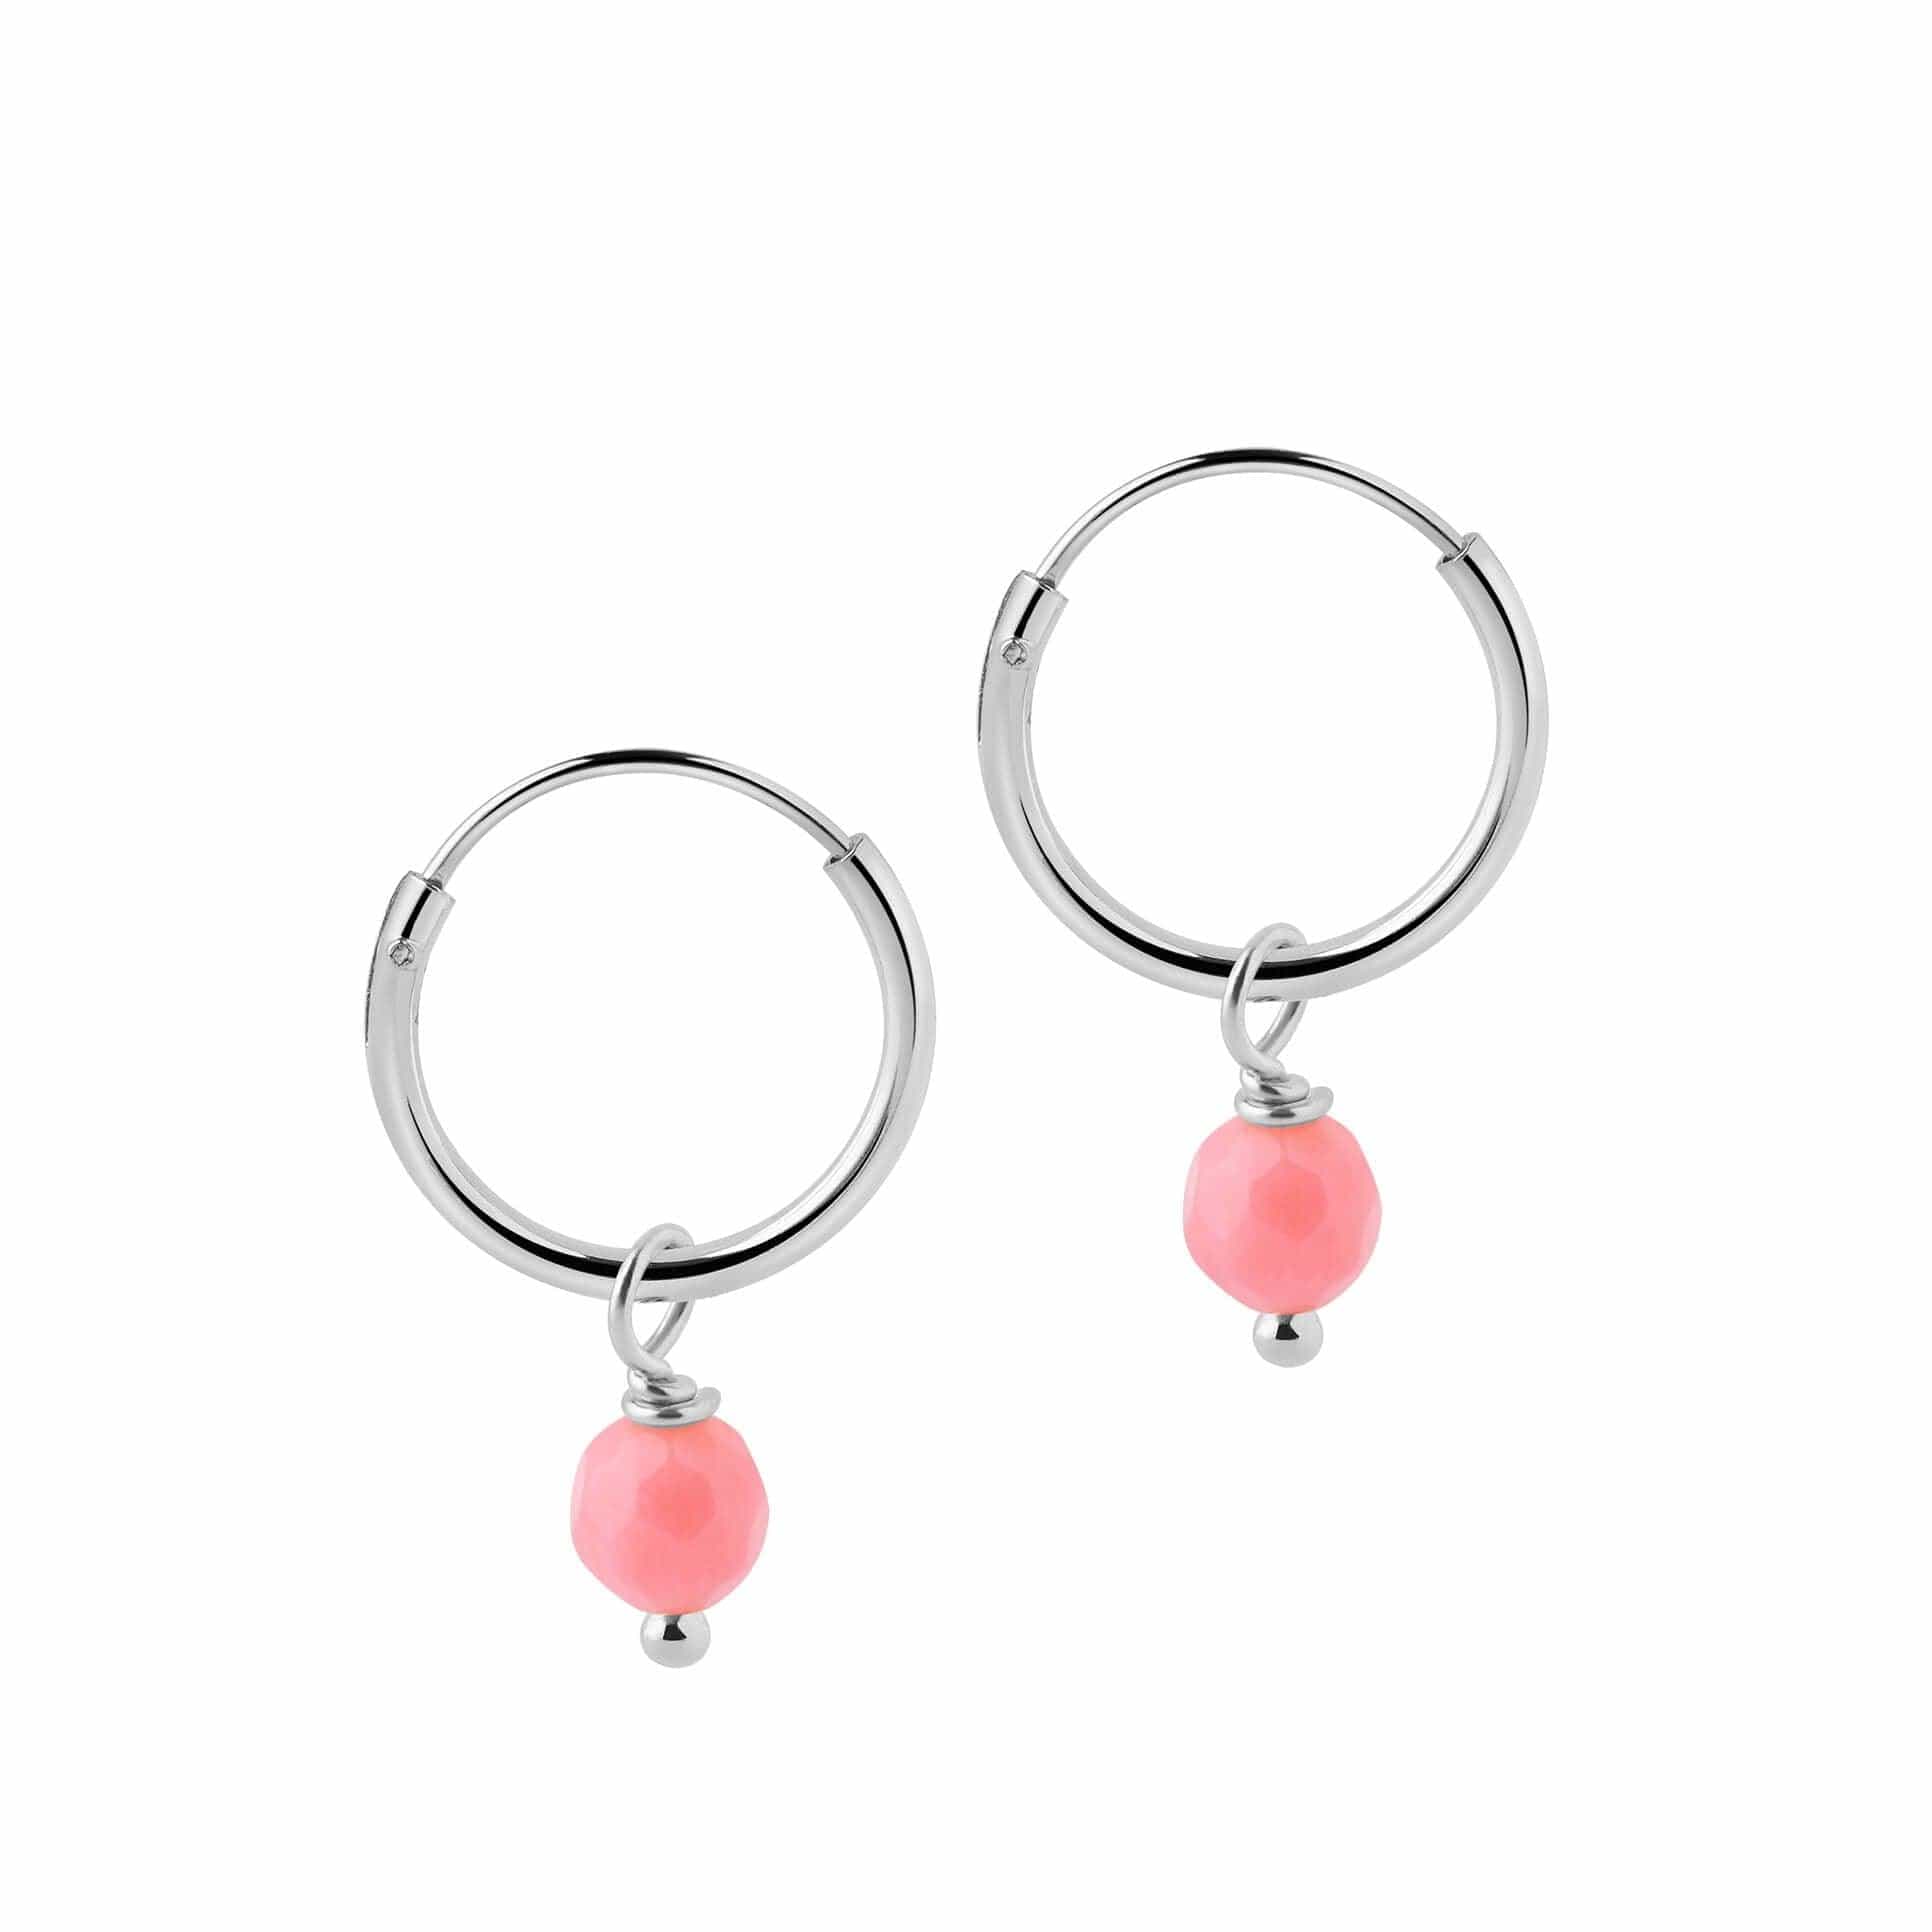 Small Silver Hoop Earrings with Pink Stone